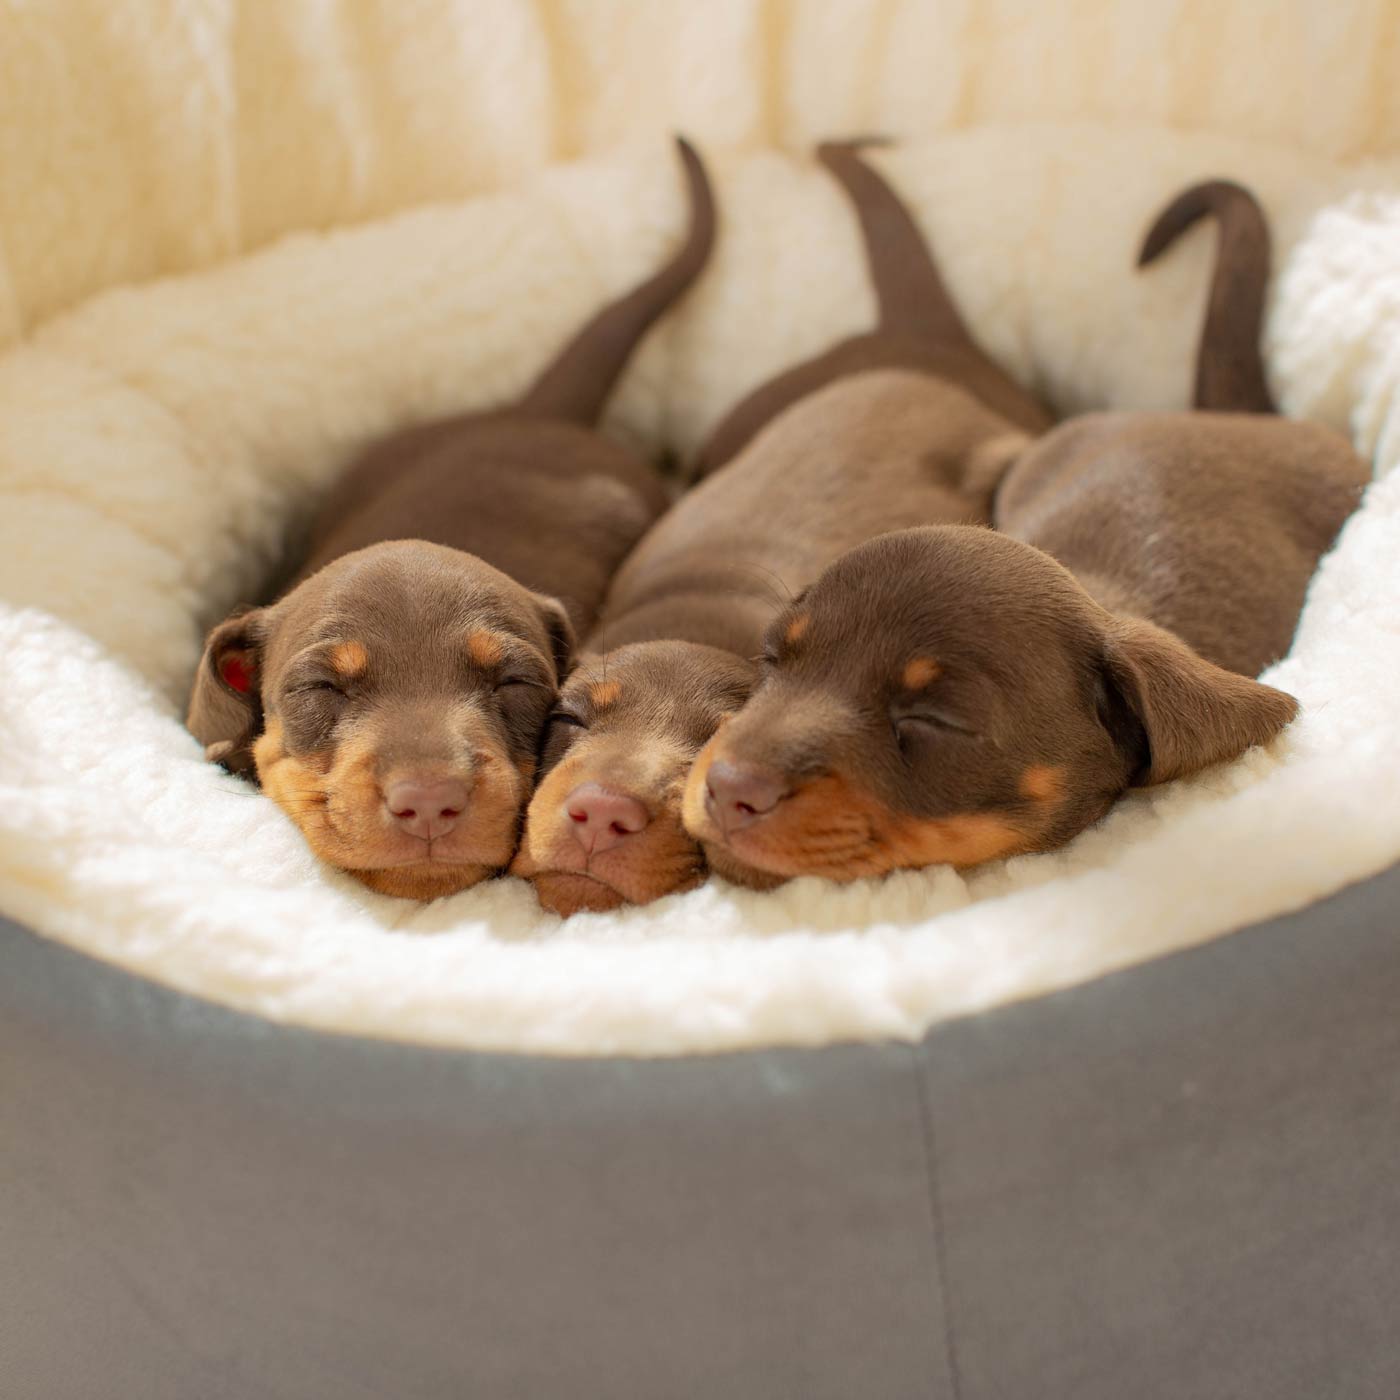 Discover our luxurious dog bed perfect for puppy growing! Crafted from plush sherpa, faux suede outer and complete with soft foam inner to present the ideal dog bed for puppies to grow! Available now at Lords & Labradors US